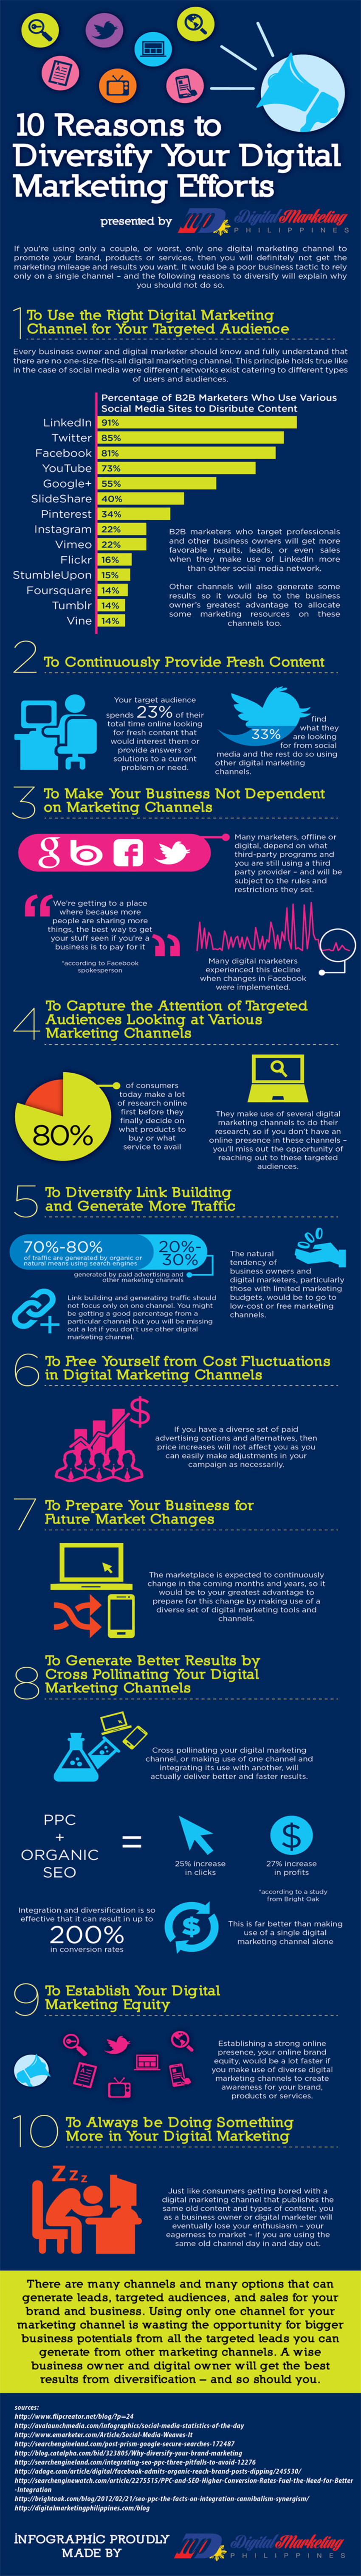 10 Reasons to Diversify Your Digital Marketing Efforts (Infographic) | The MarTech Digest | Scoop.it